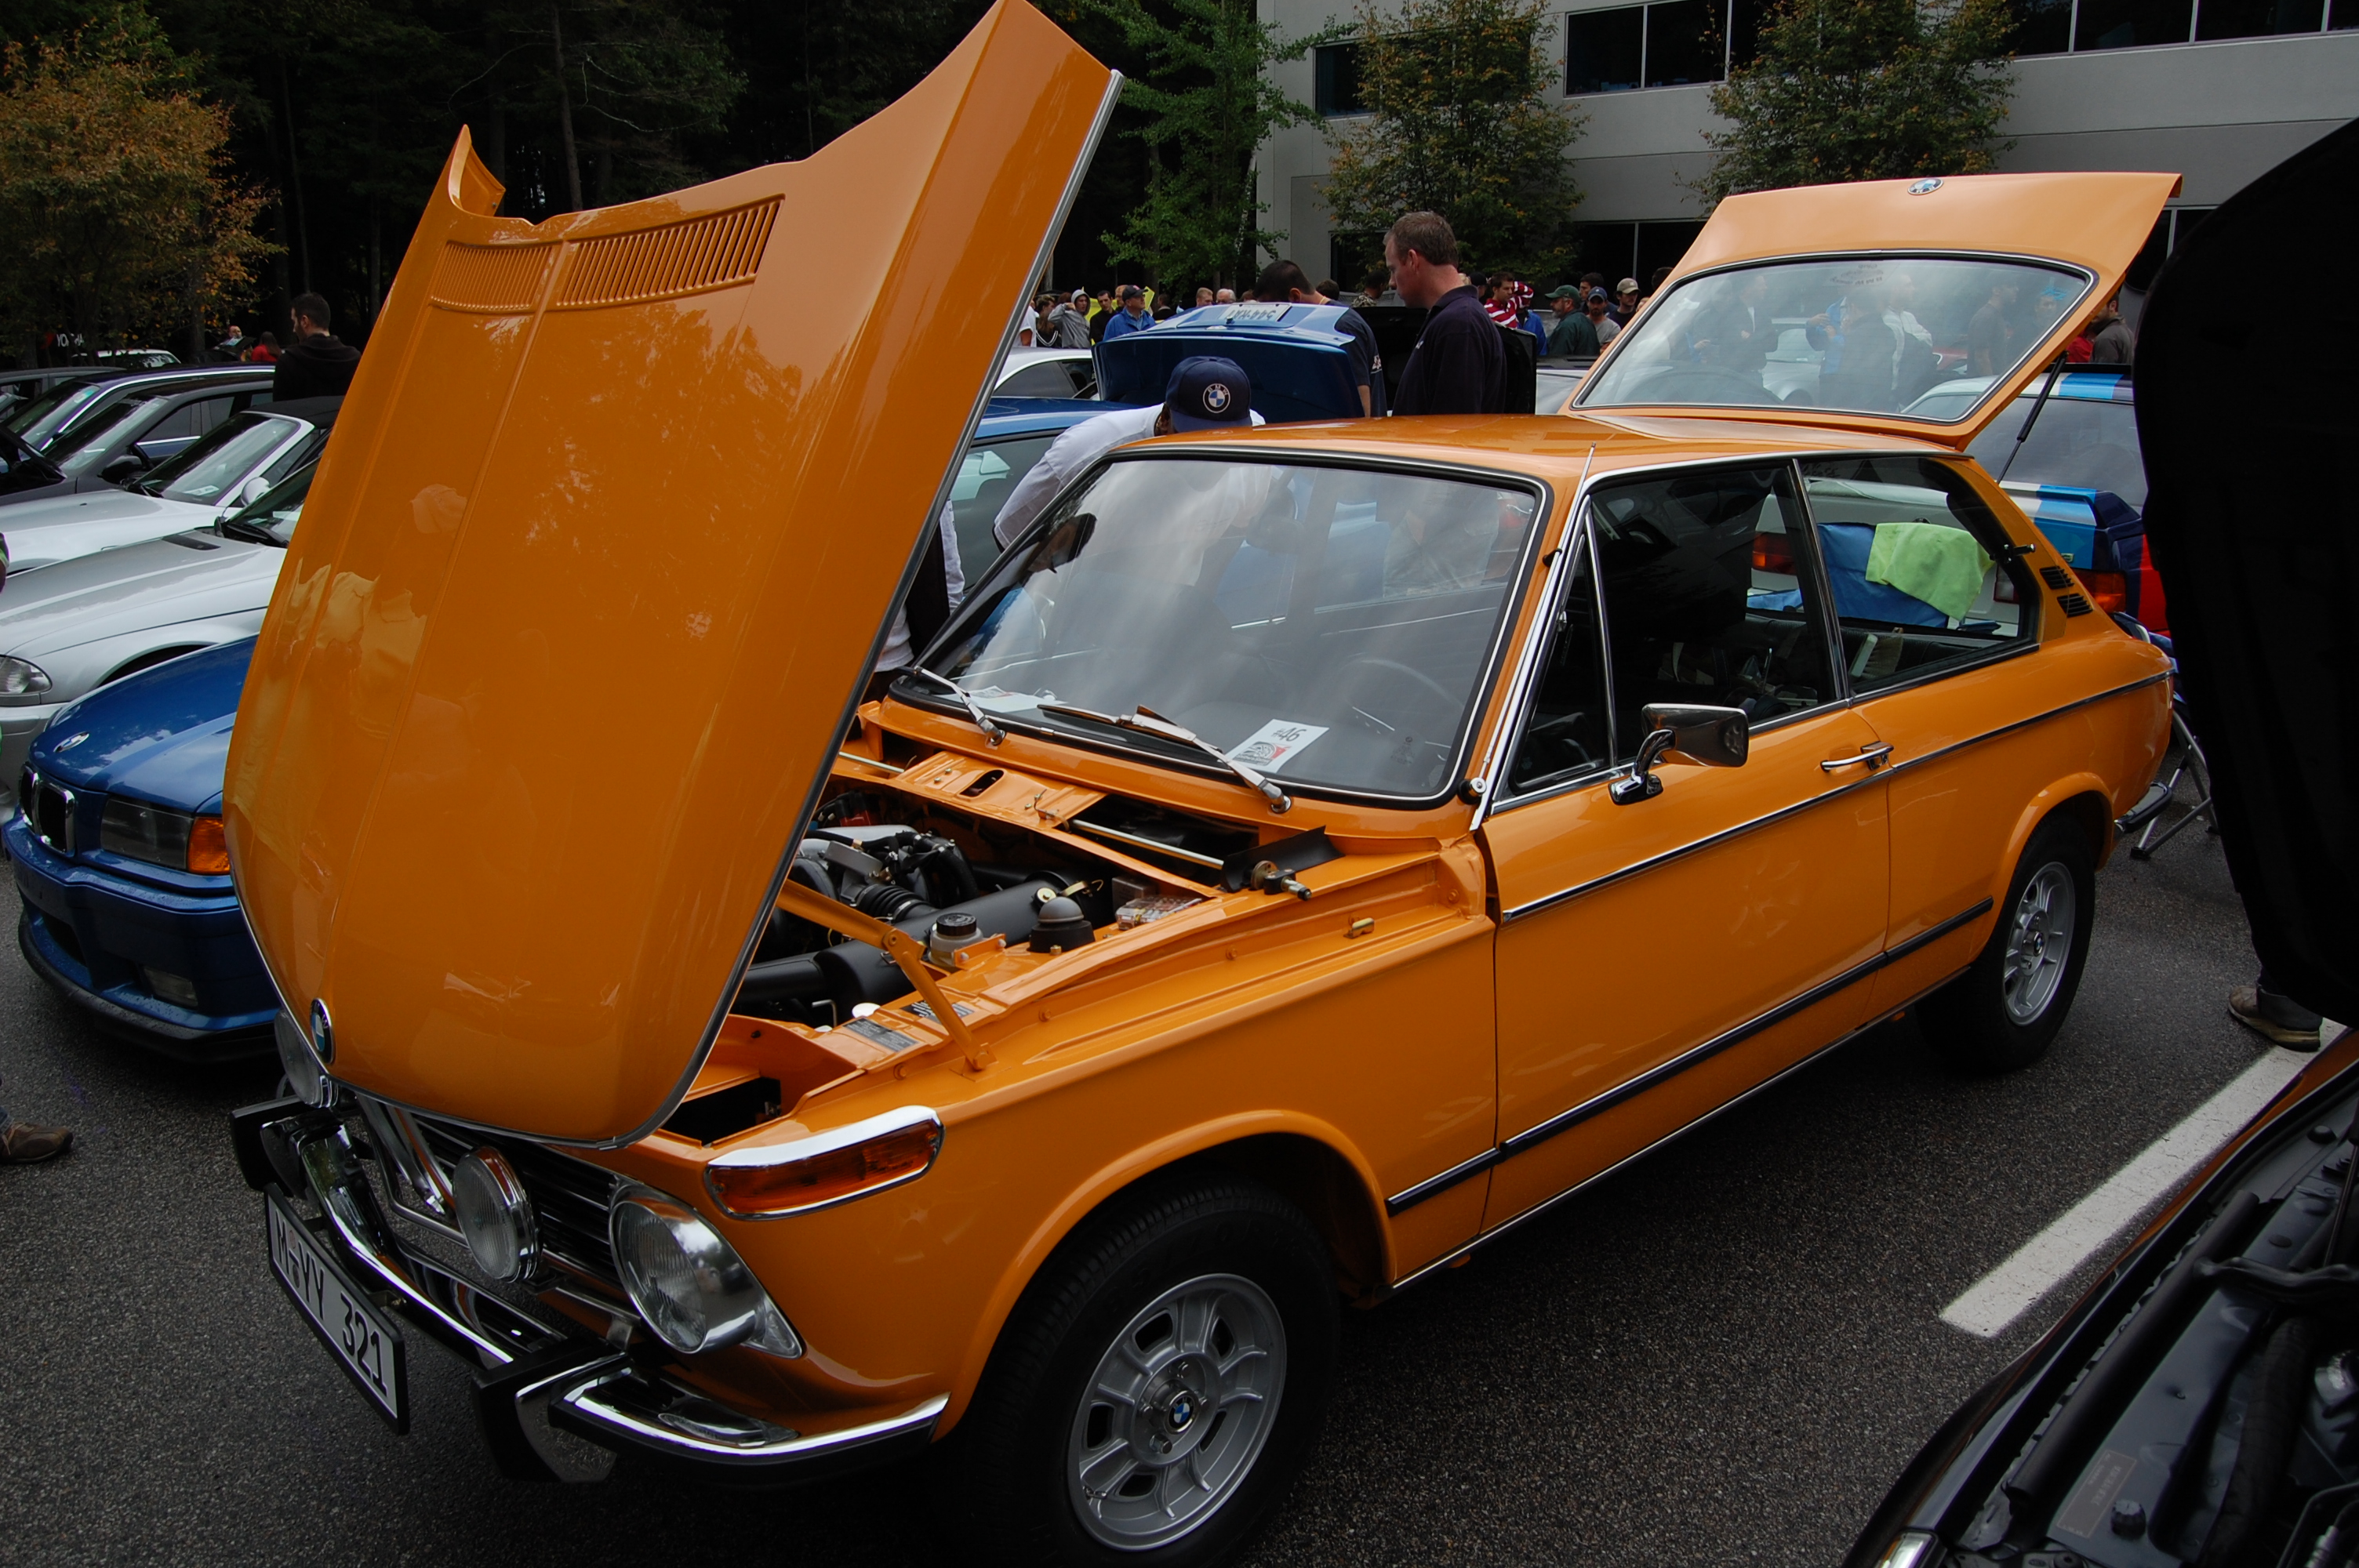 BMW 2002 tii Touring | Flickr - Photo Sharing!